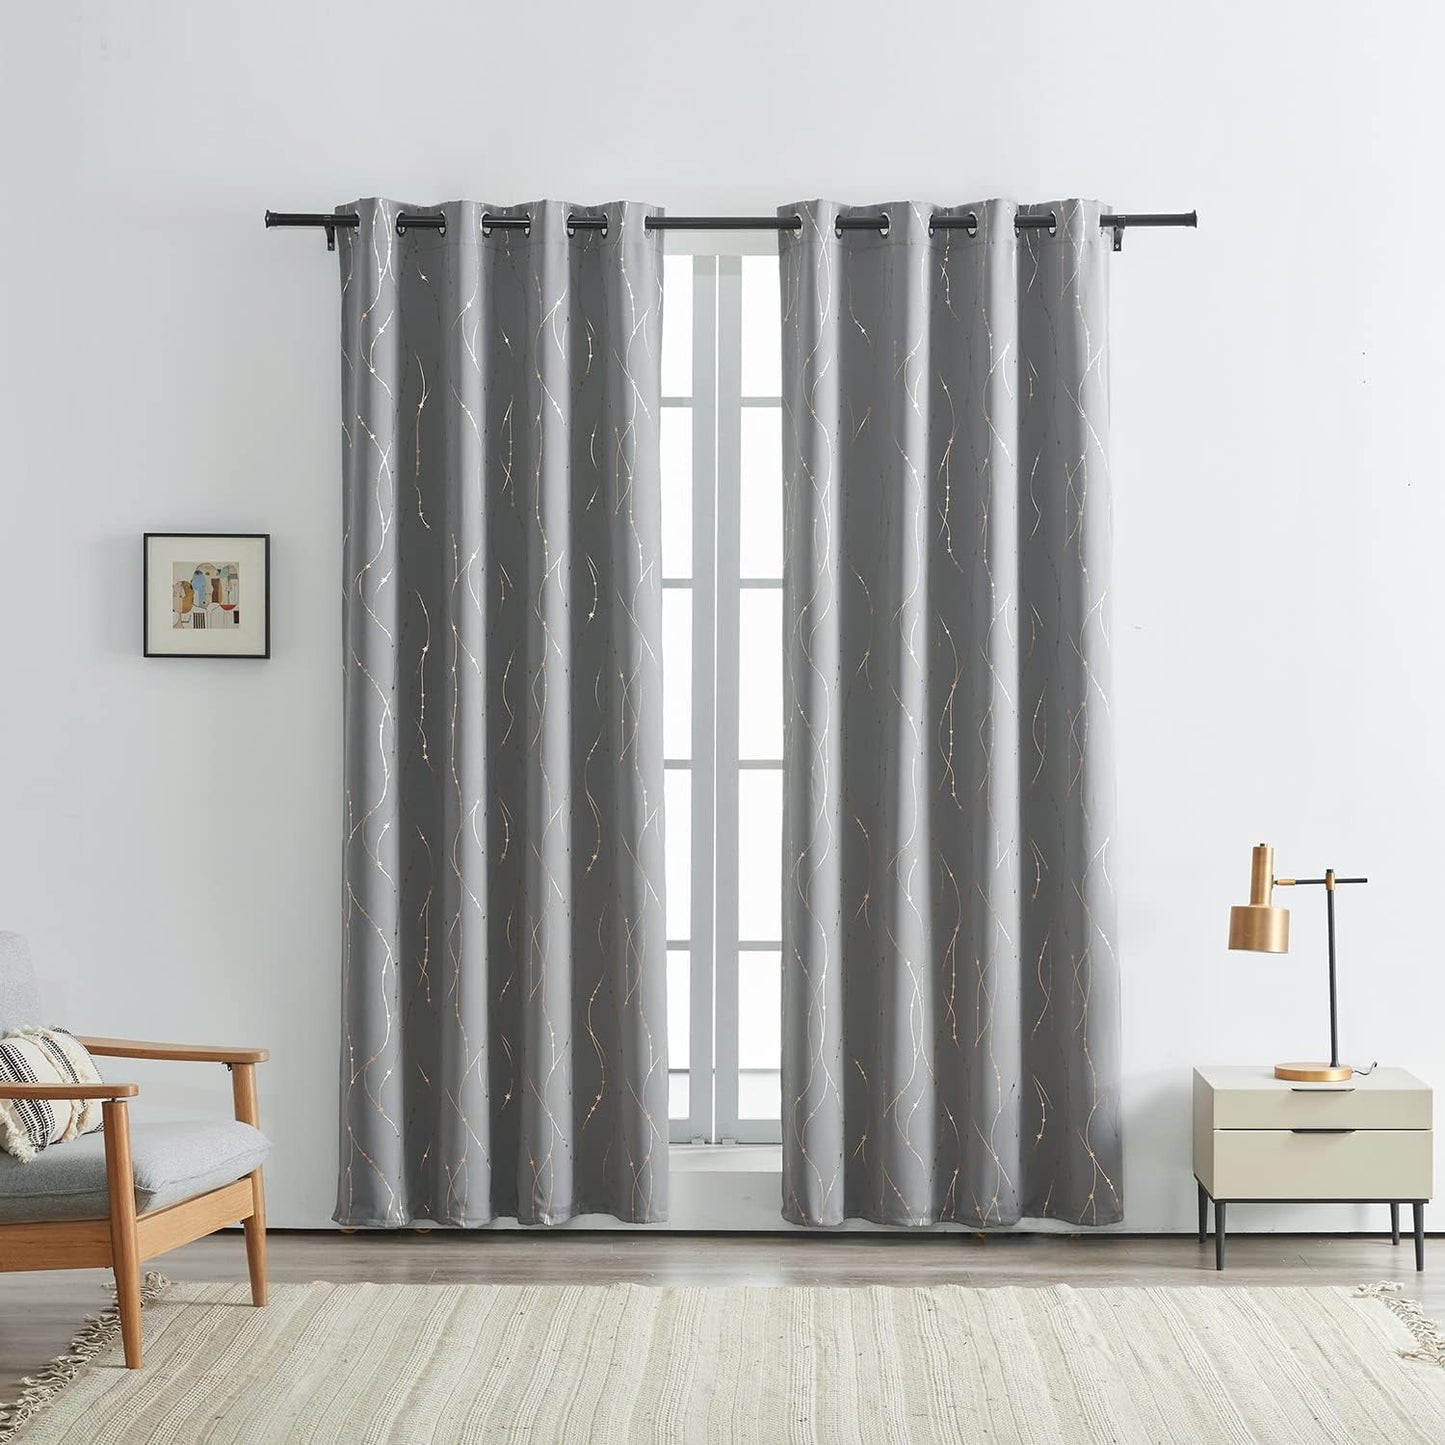 SMILE WEAVER Black Blackout Curtains for Bedroom 72 Inch Long 2 Panels,Room Darkening Curtain with Gold Print Design Noise Reducing Thermal Insulated Window Treatment Drapes for Living Room  SMILE WEAVER Light Grey Gold 52Wx63L 